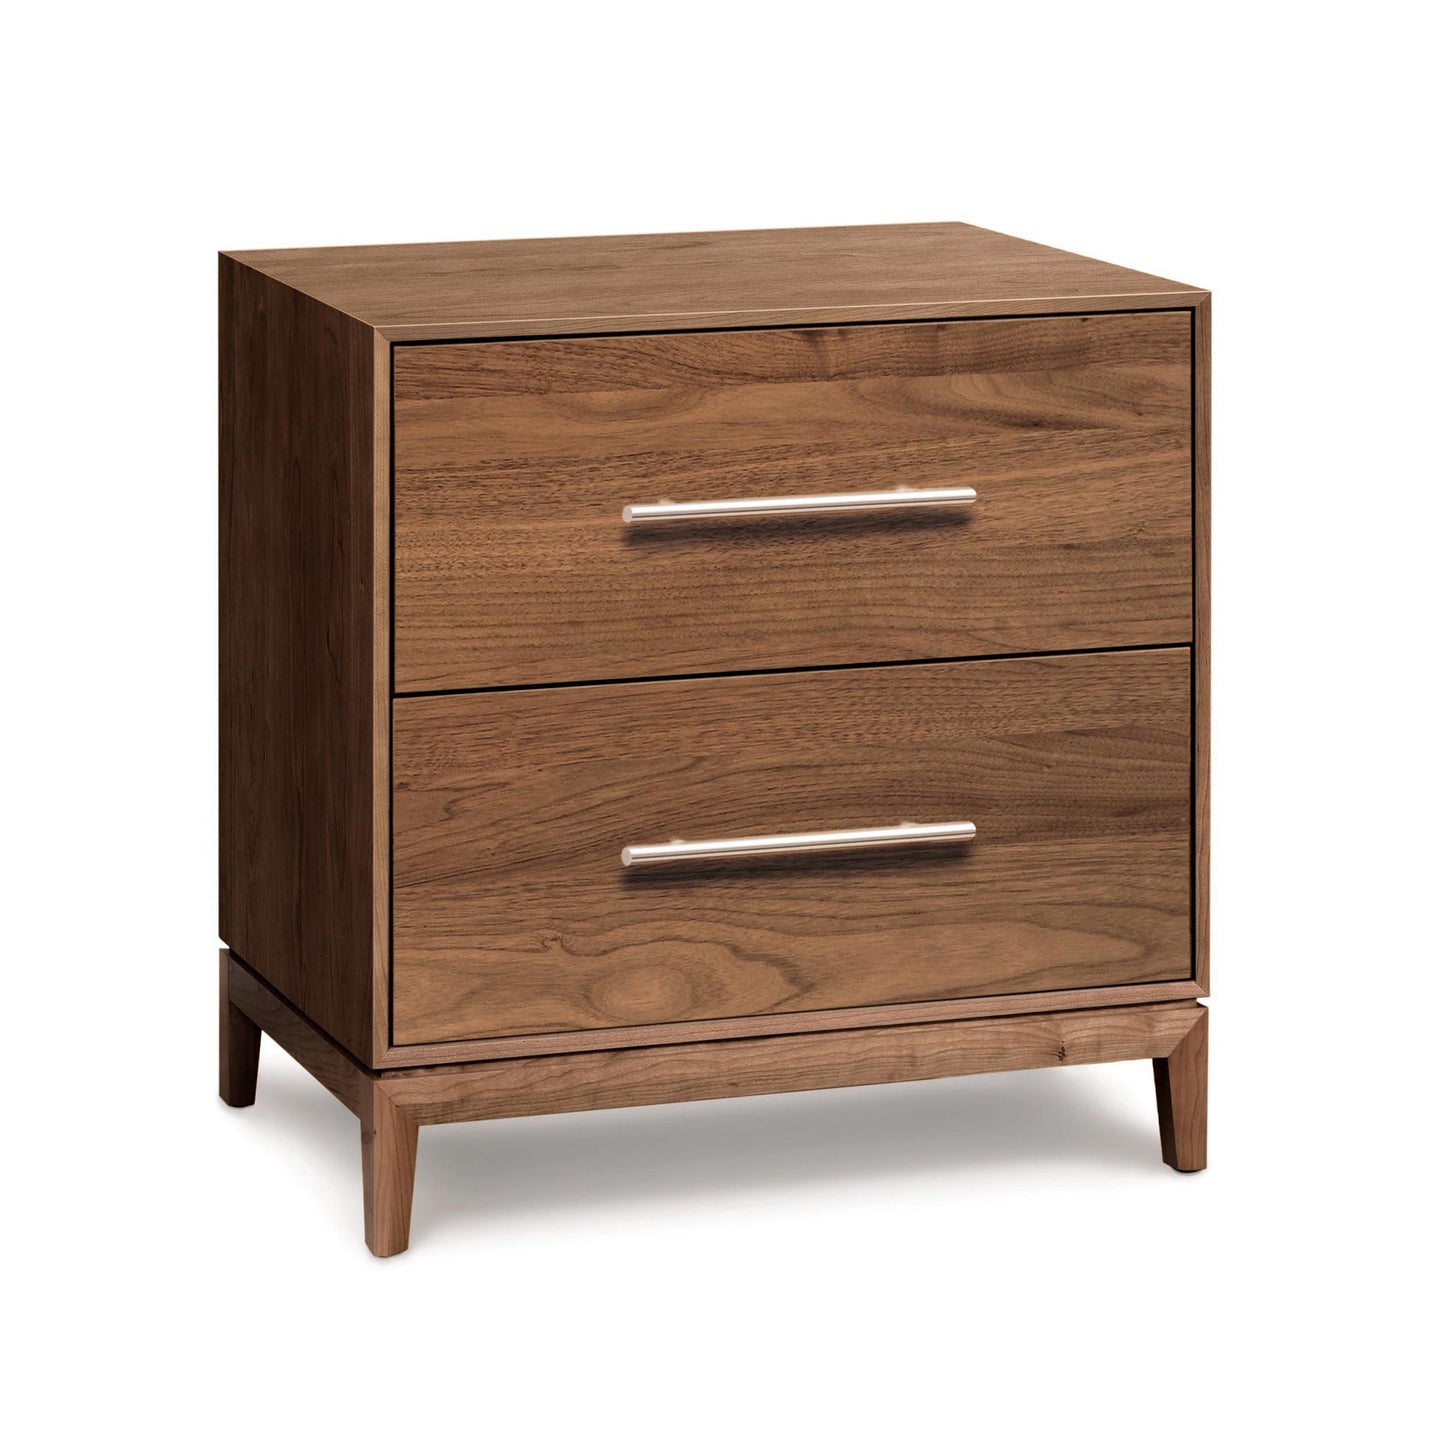 A modern nightstand with two drawers.